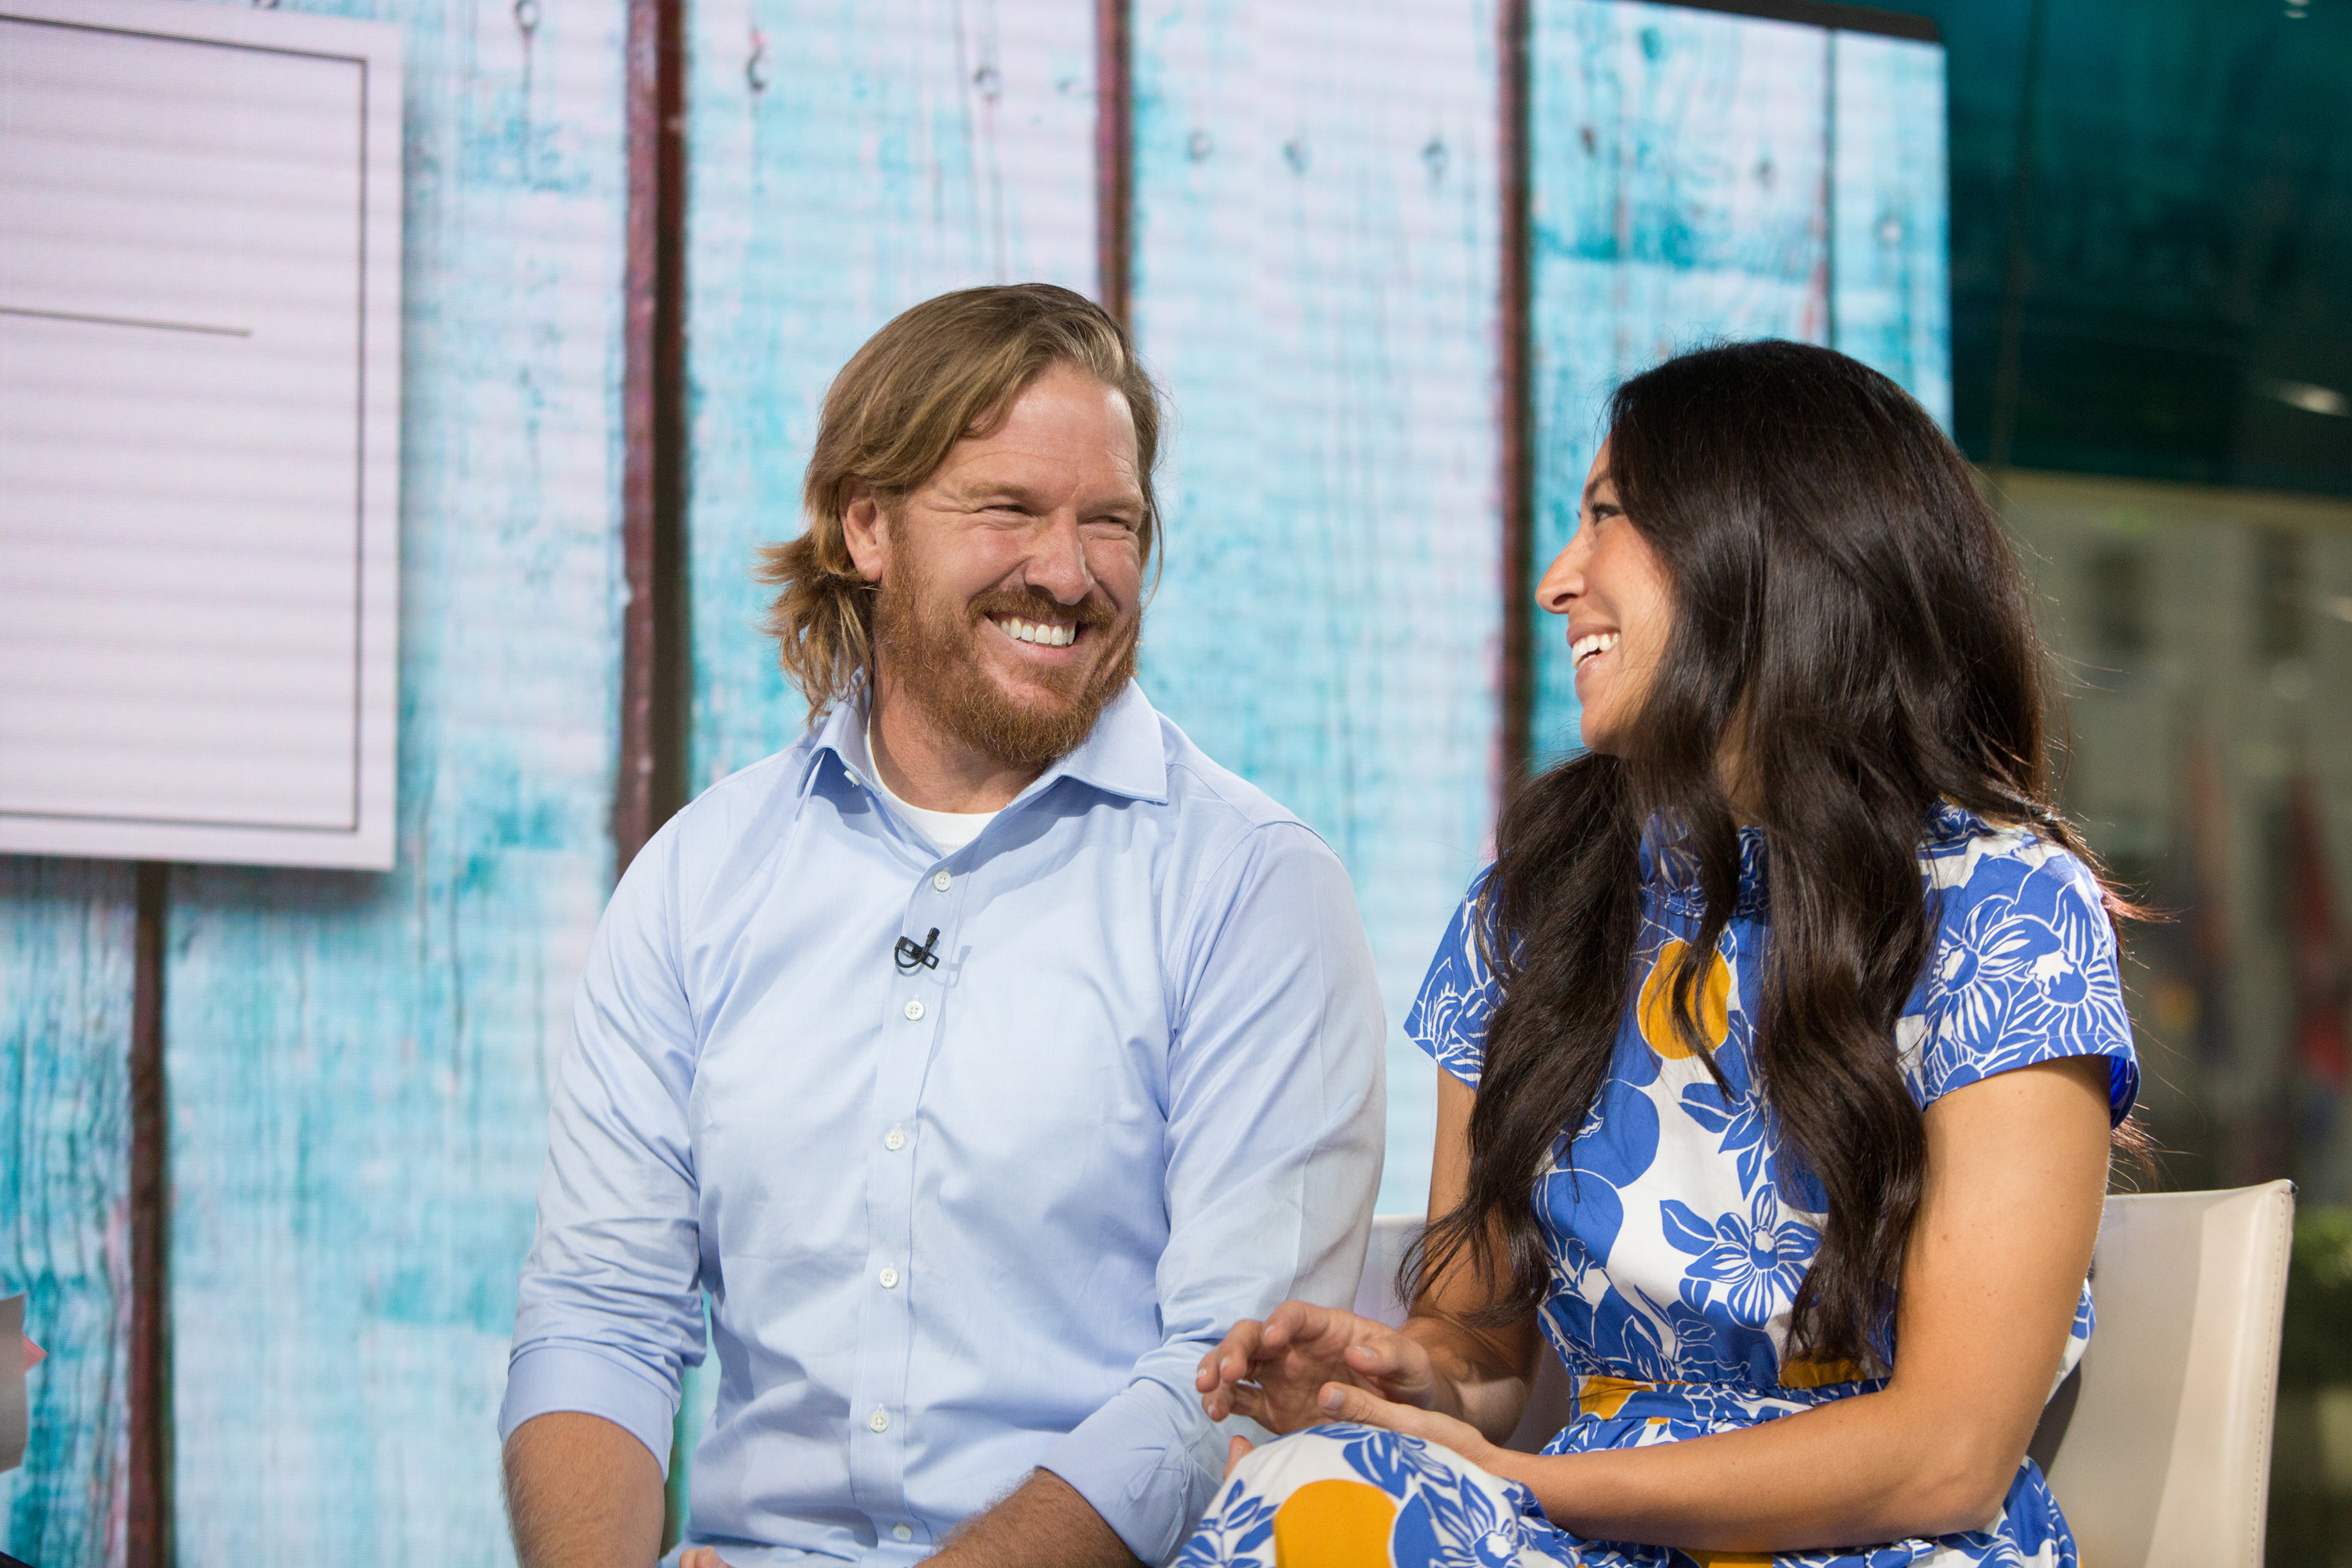 Chip and Joanna Gaines on the Today Show